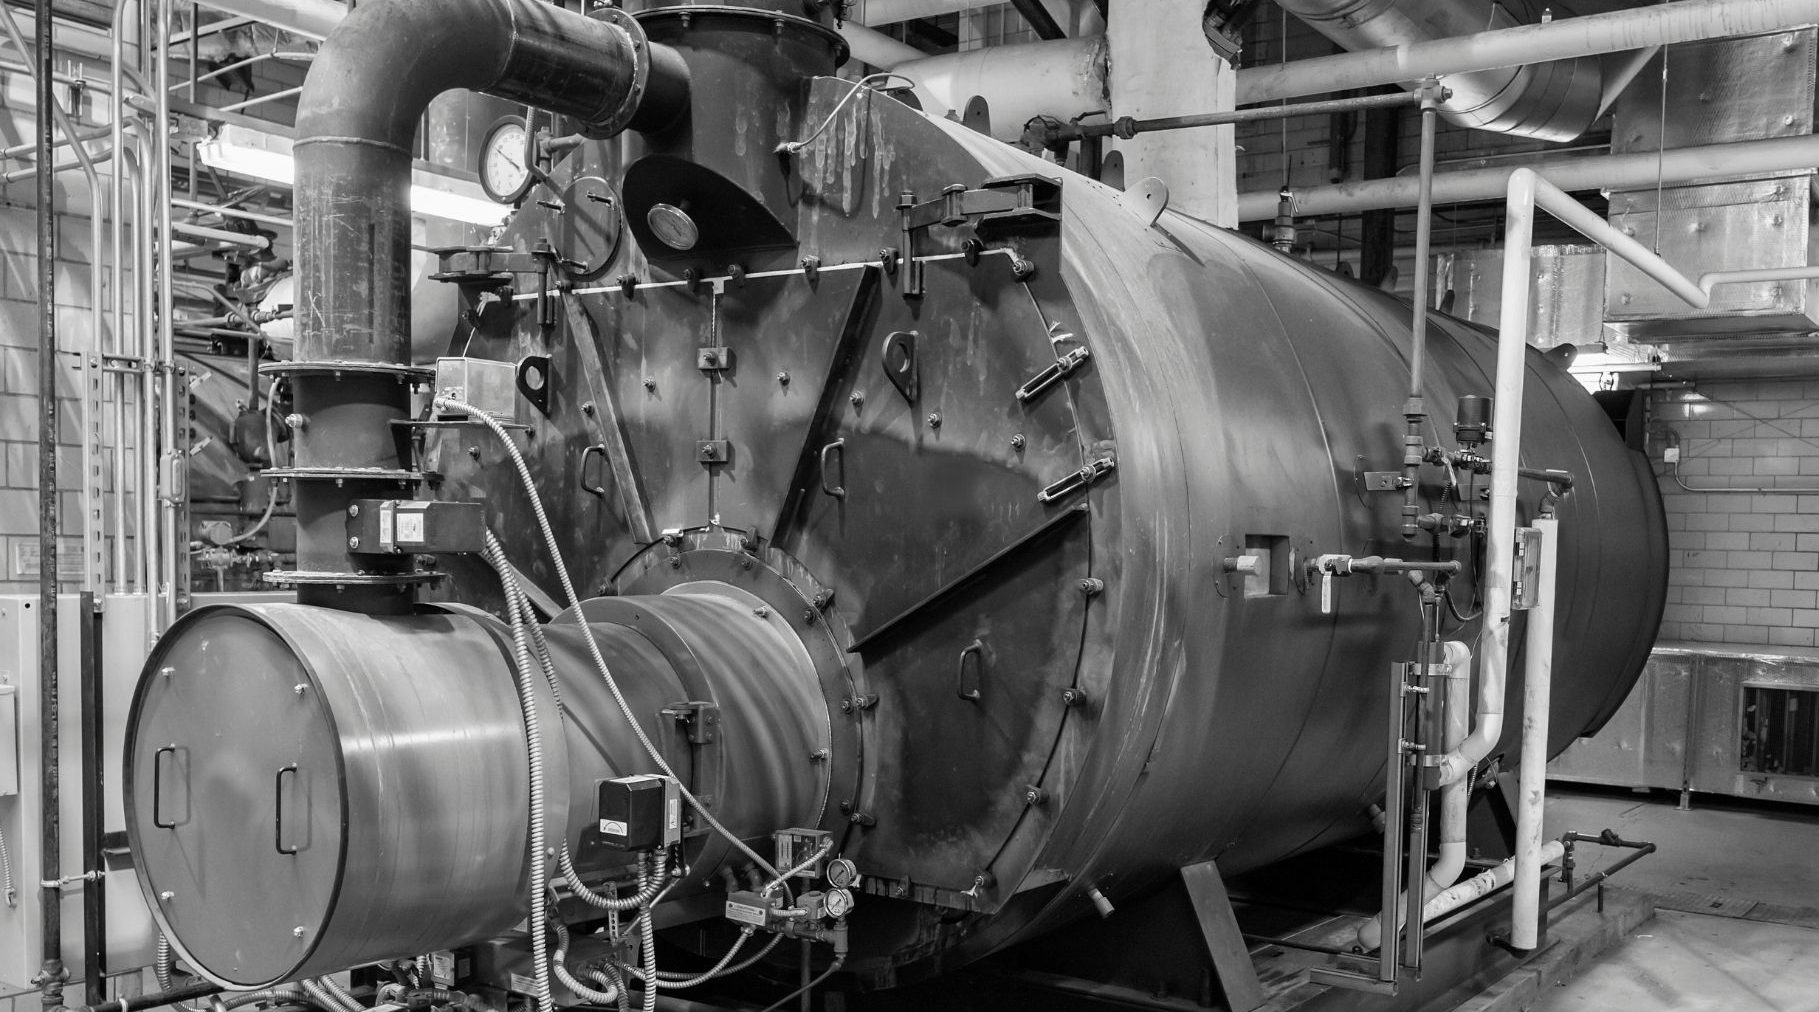 Global Gas Insulated Transformer Market Outlook, Opportunities And Strategies – Includes Gas Insulated Transformer Market Size